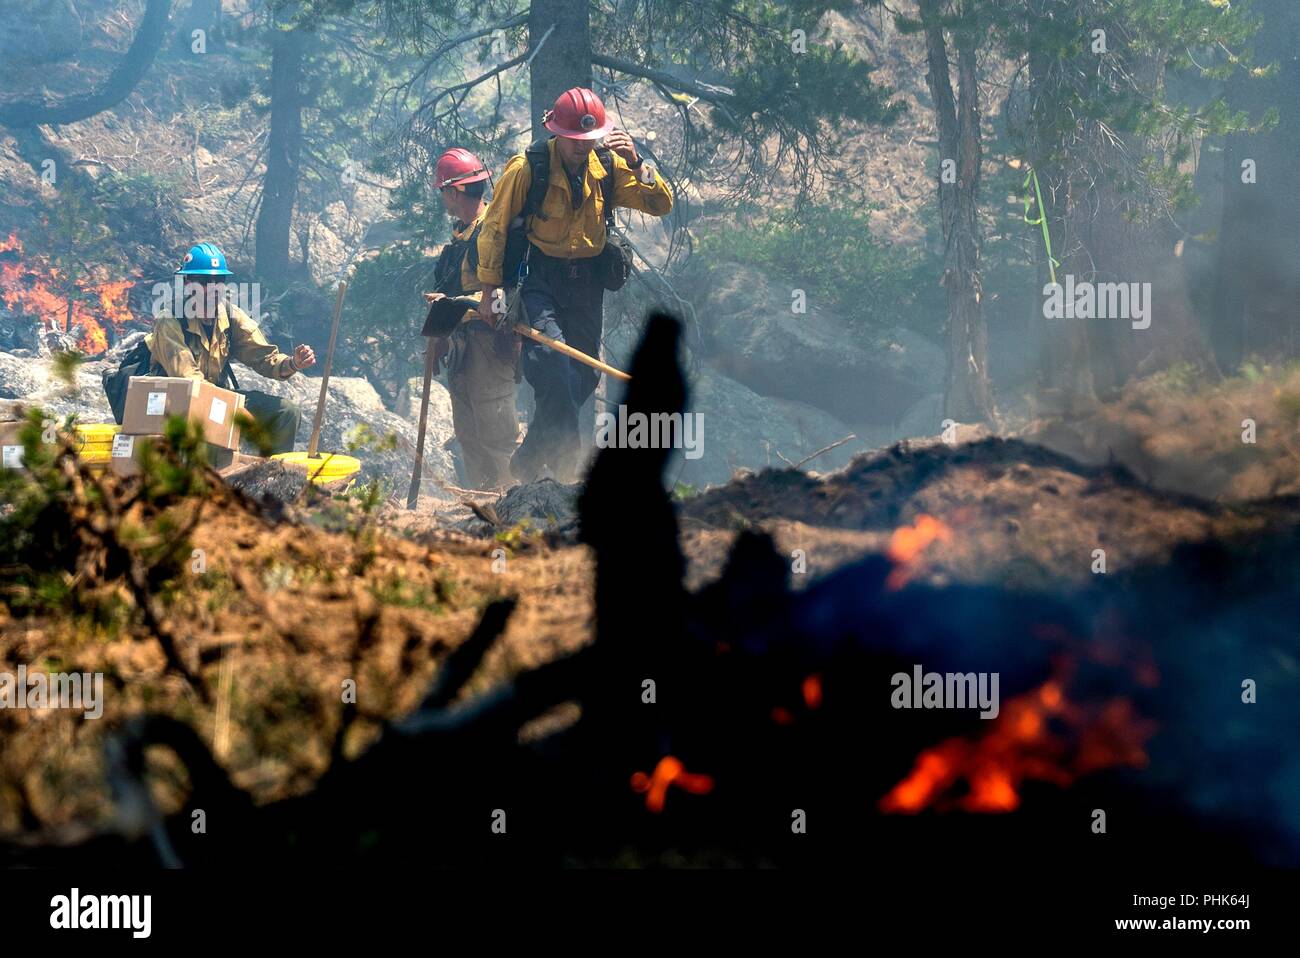 Backcountry firefighters battle the Donnell Fire in Stanislaus National Forest August 12, 2018 near Sonora, California. The wildfire burned 36,335 acres and destroyed 54 major structures across Northern California. Stock Photo